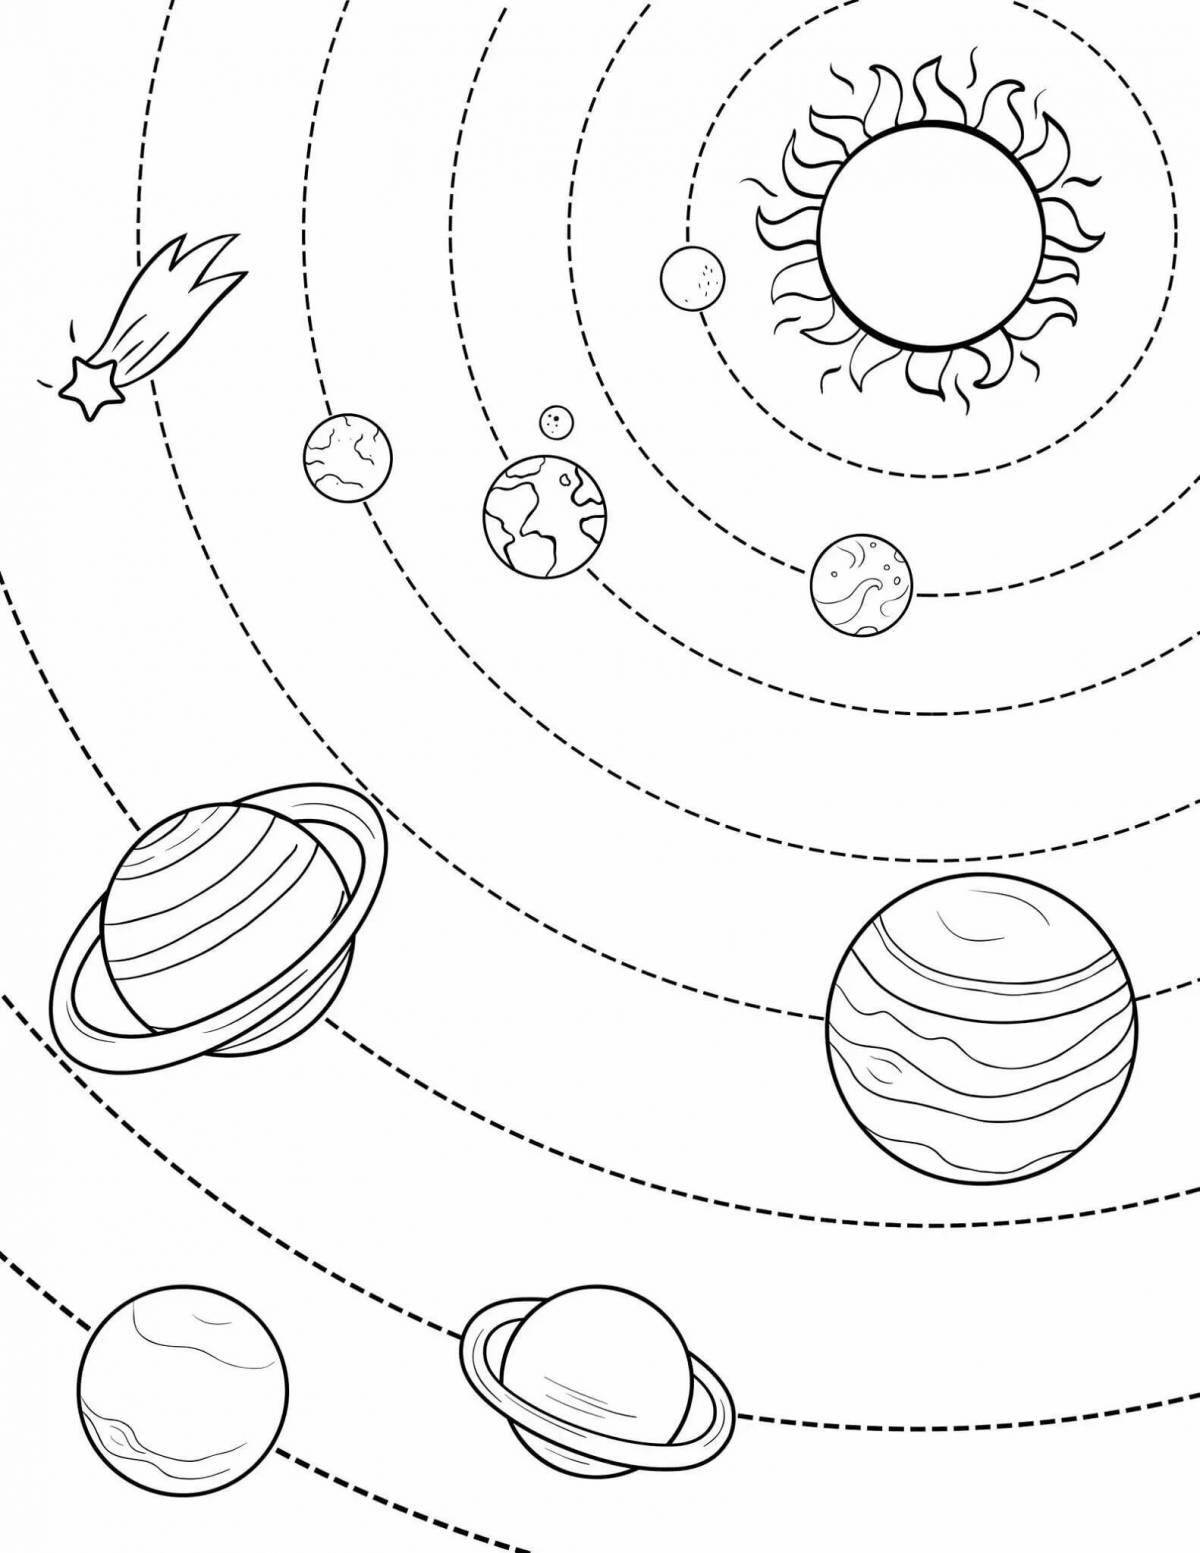 Great coloring of a solar system planet